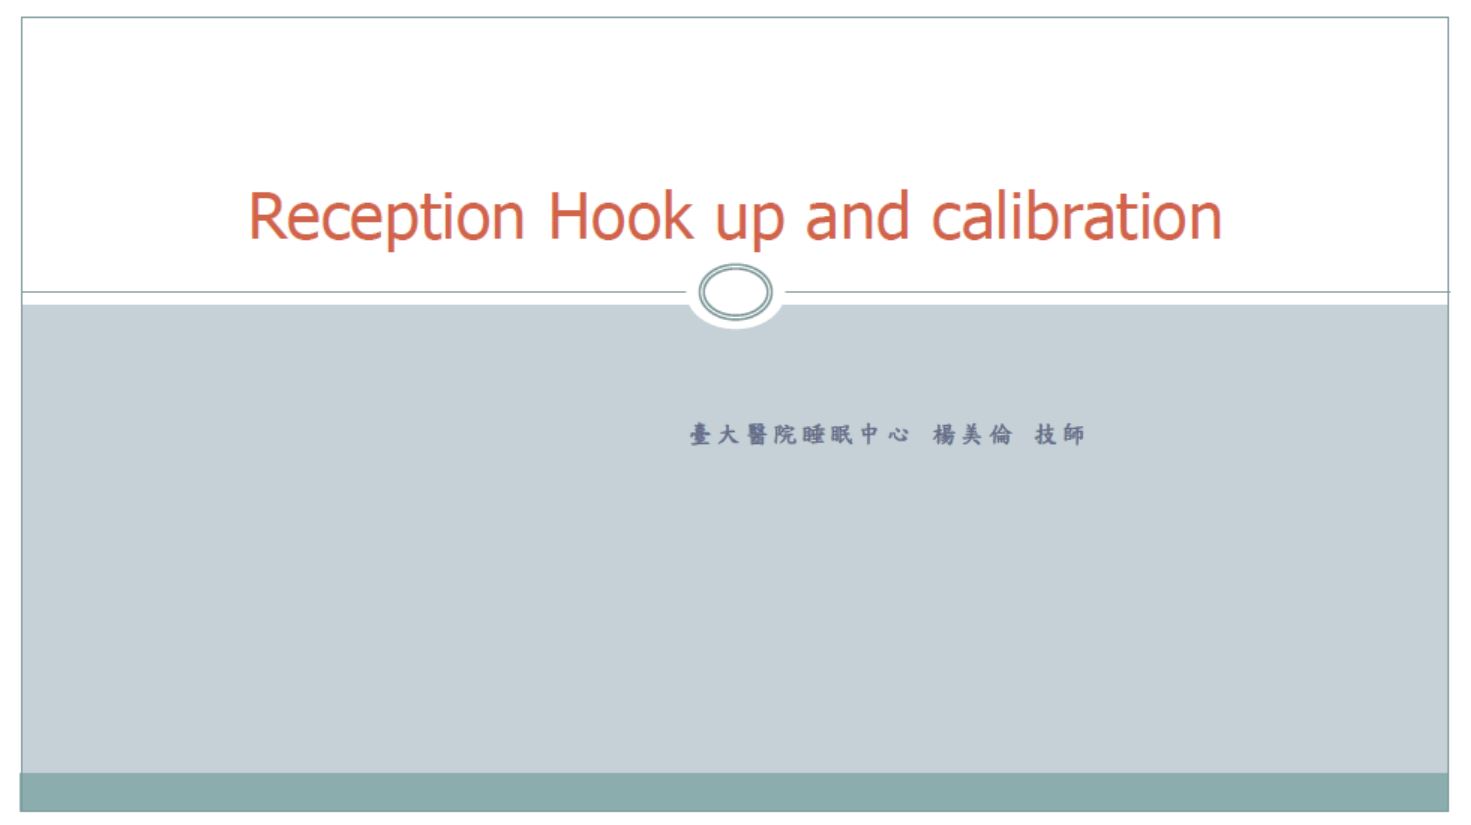 Reception hook up and calibration